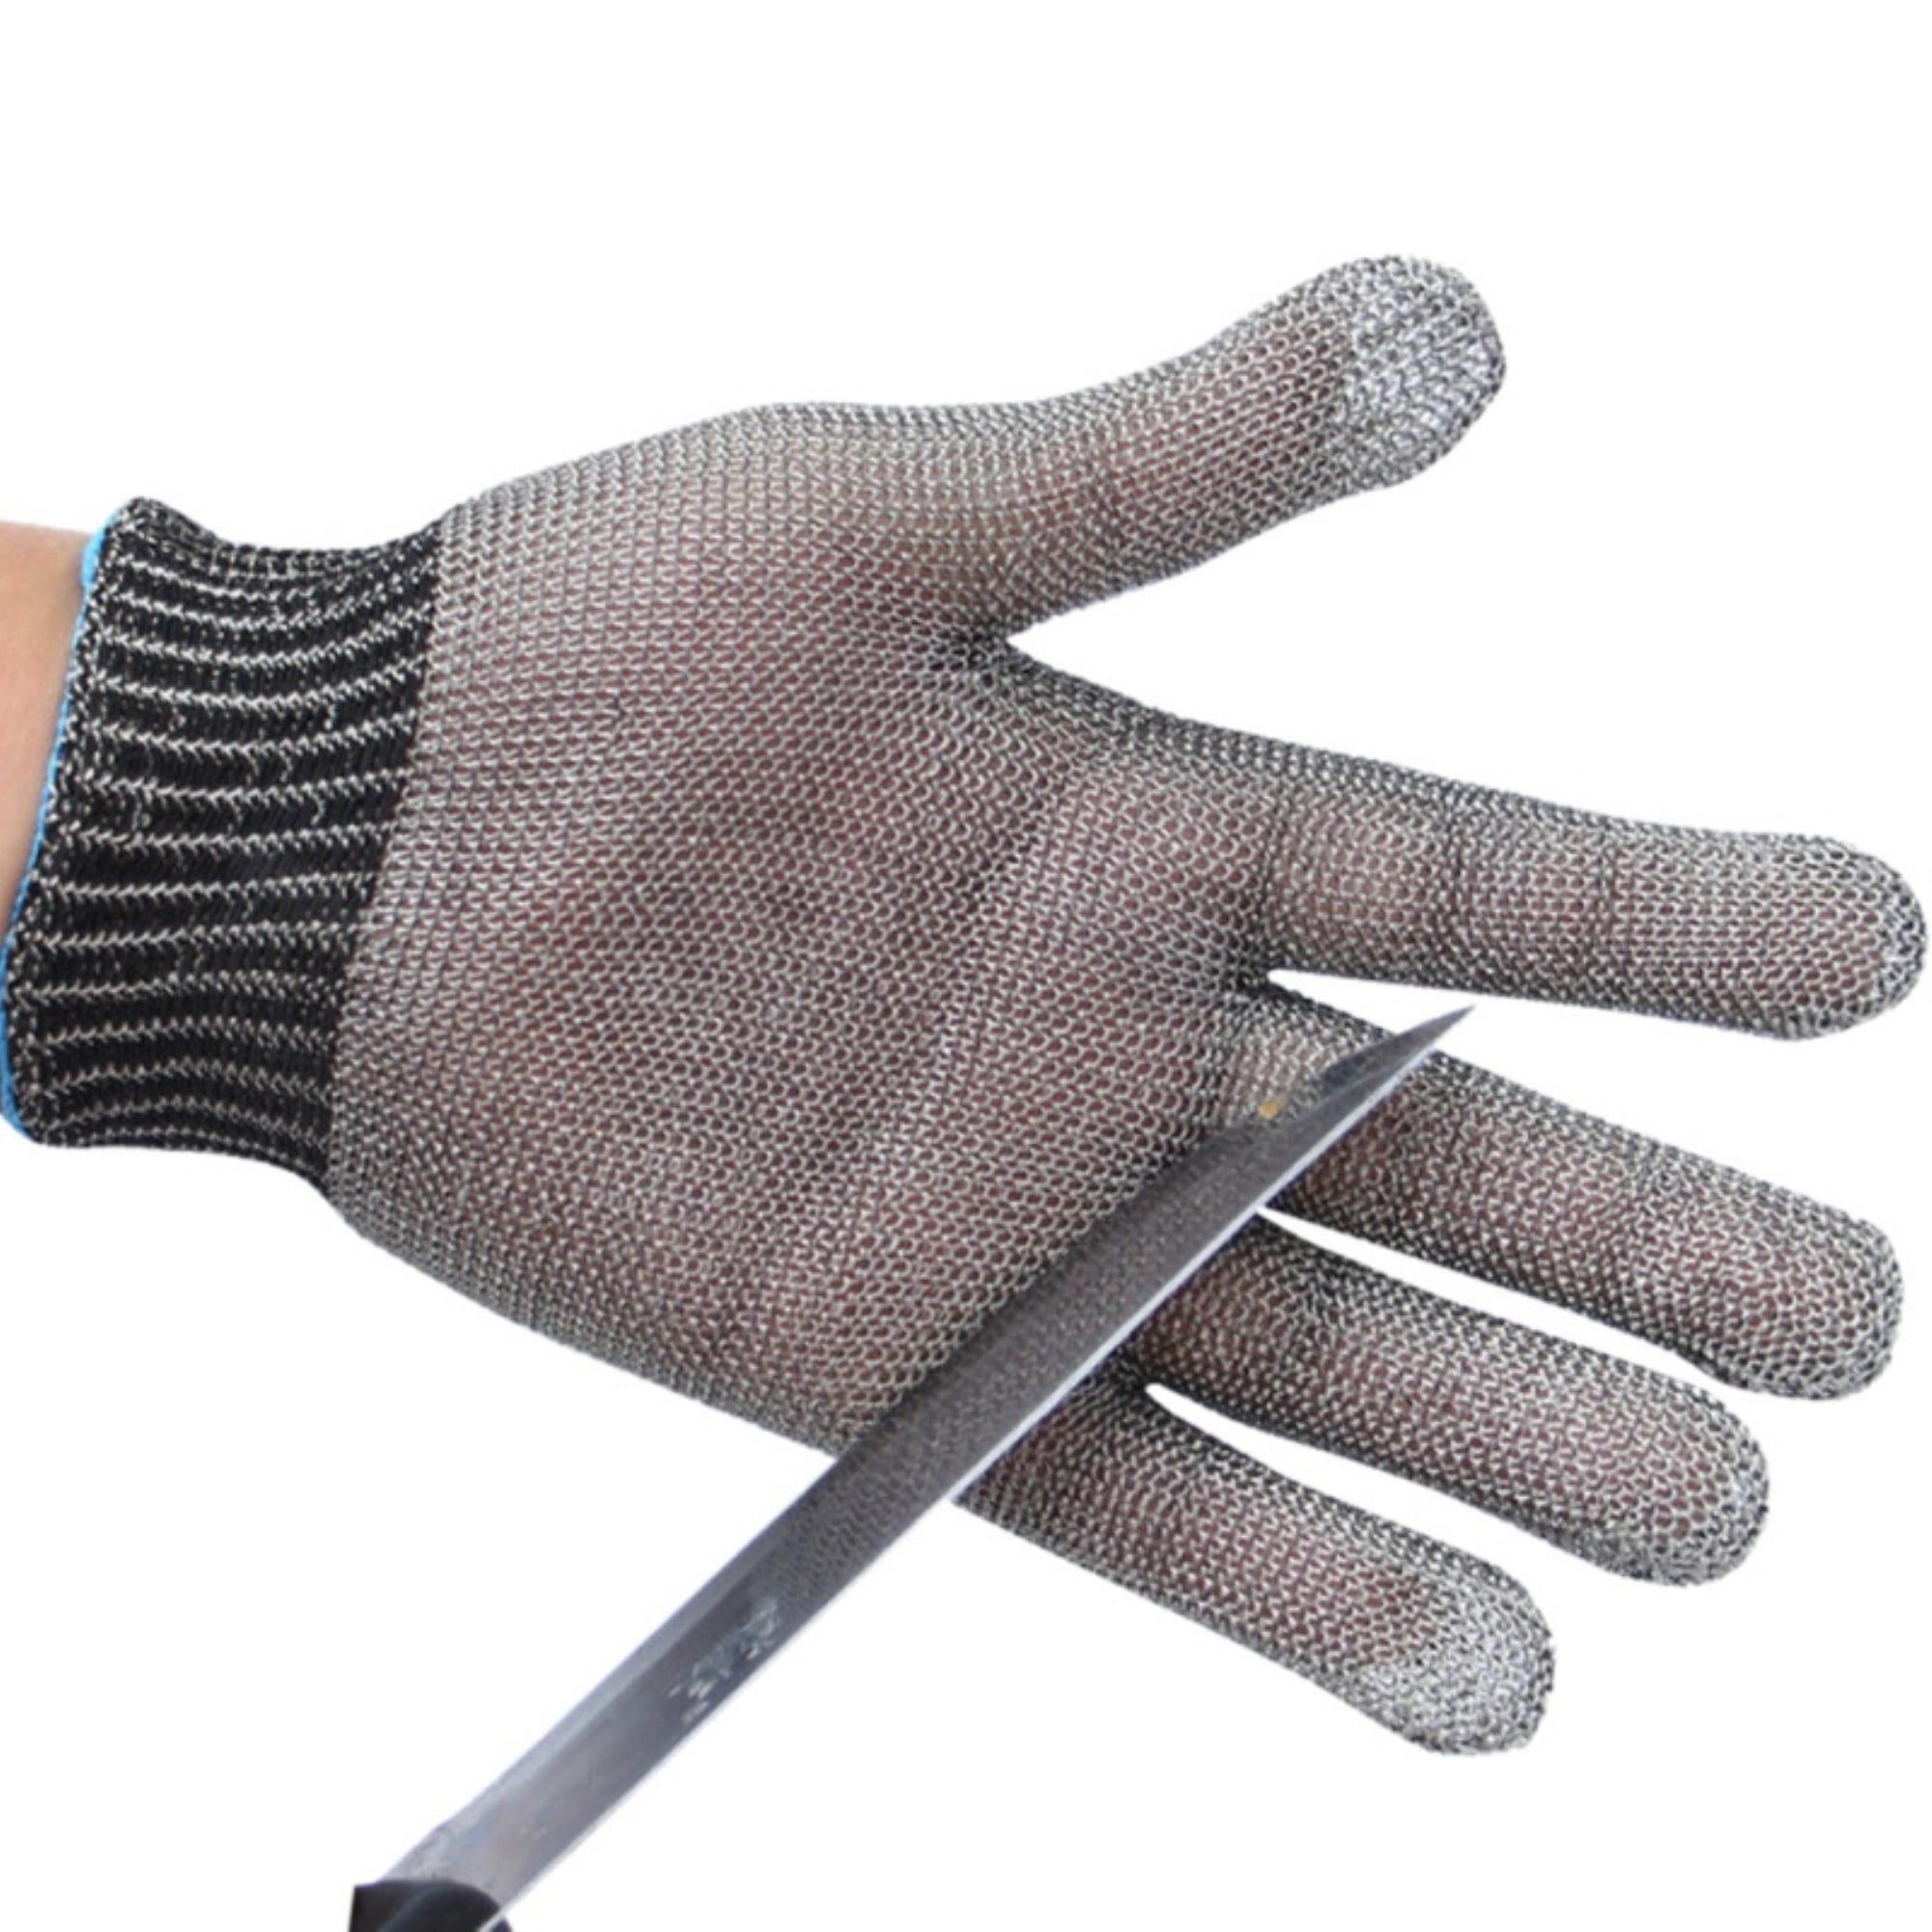 Cut Proof Stab Resistant Gloves Level 5 Butcher Mechanic Chopping Safety Wear XL 